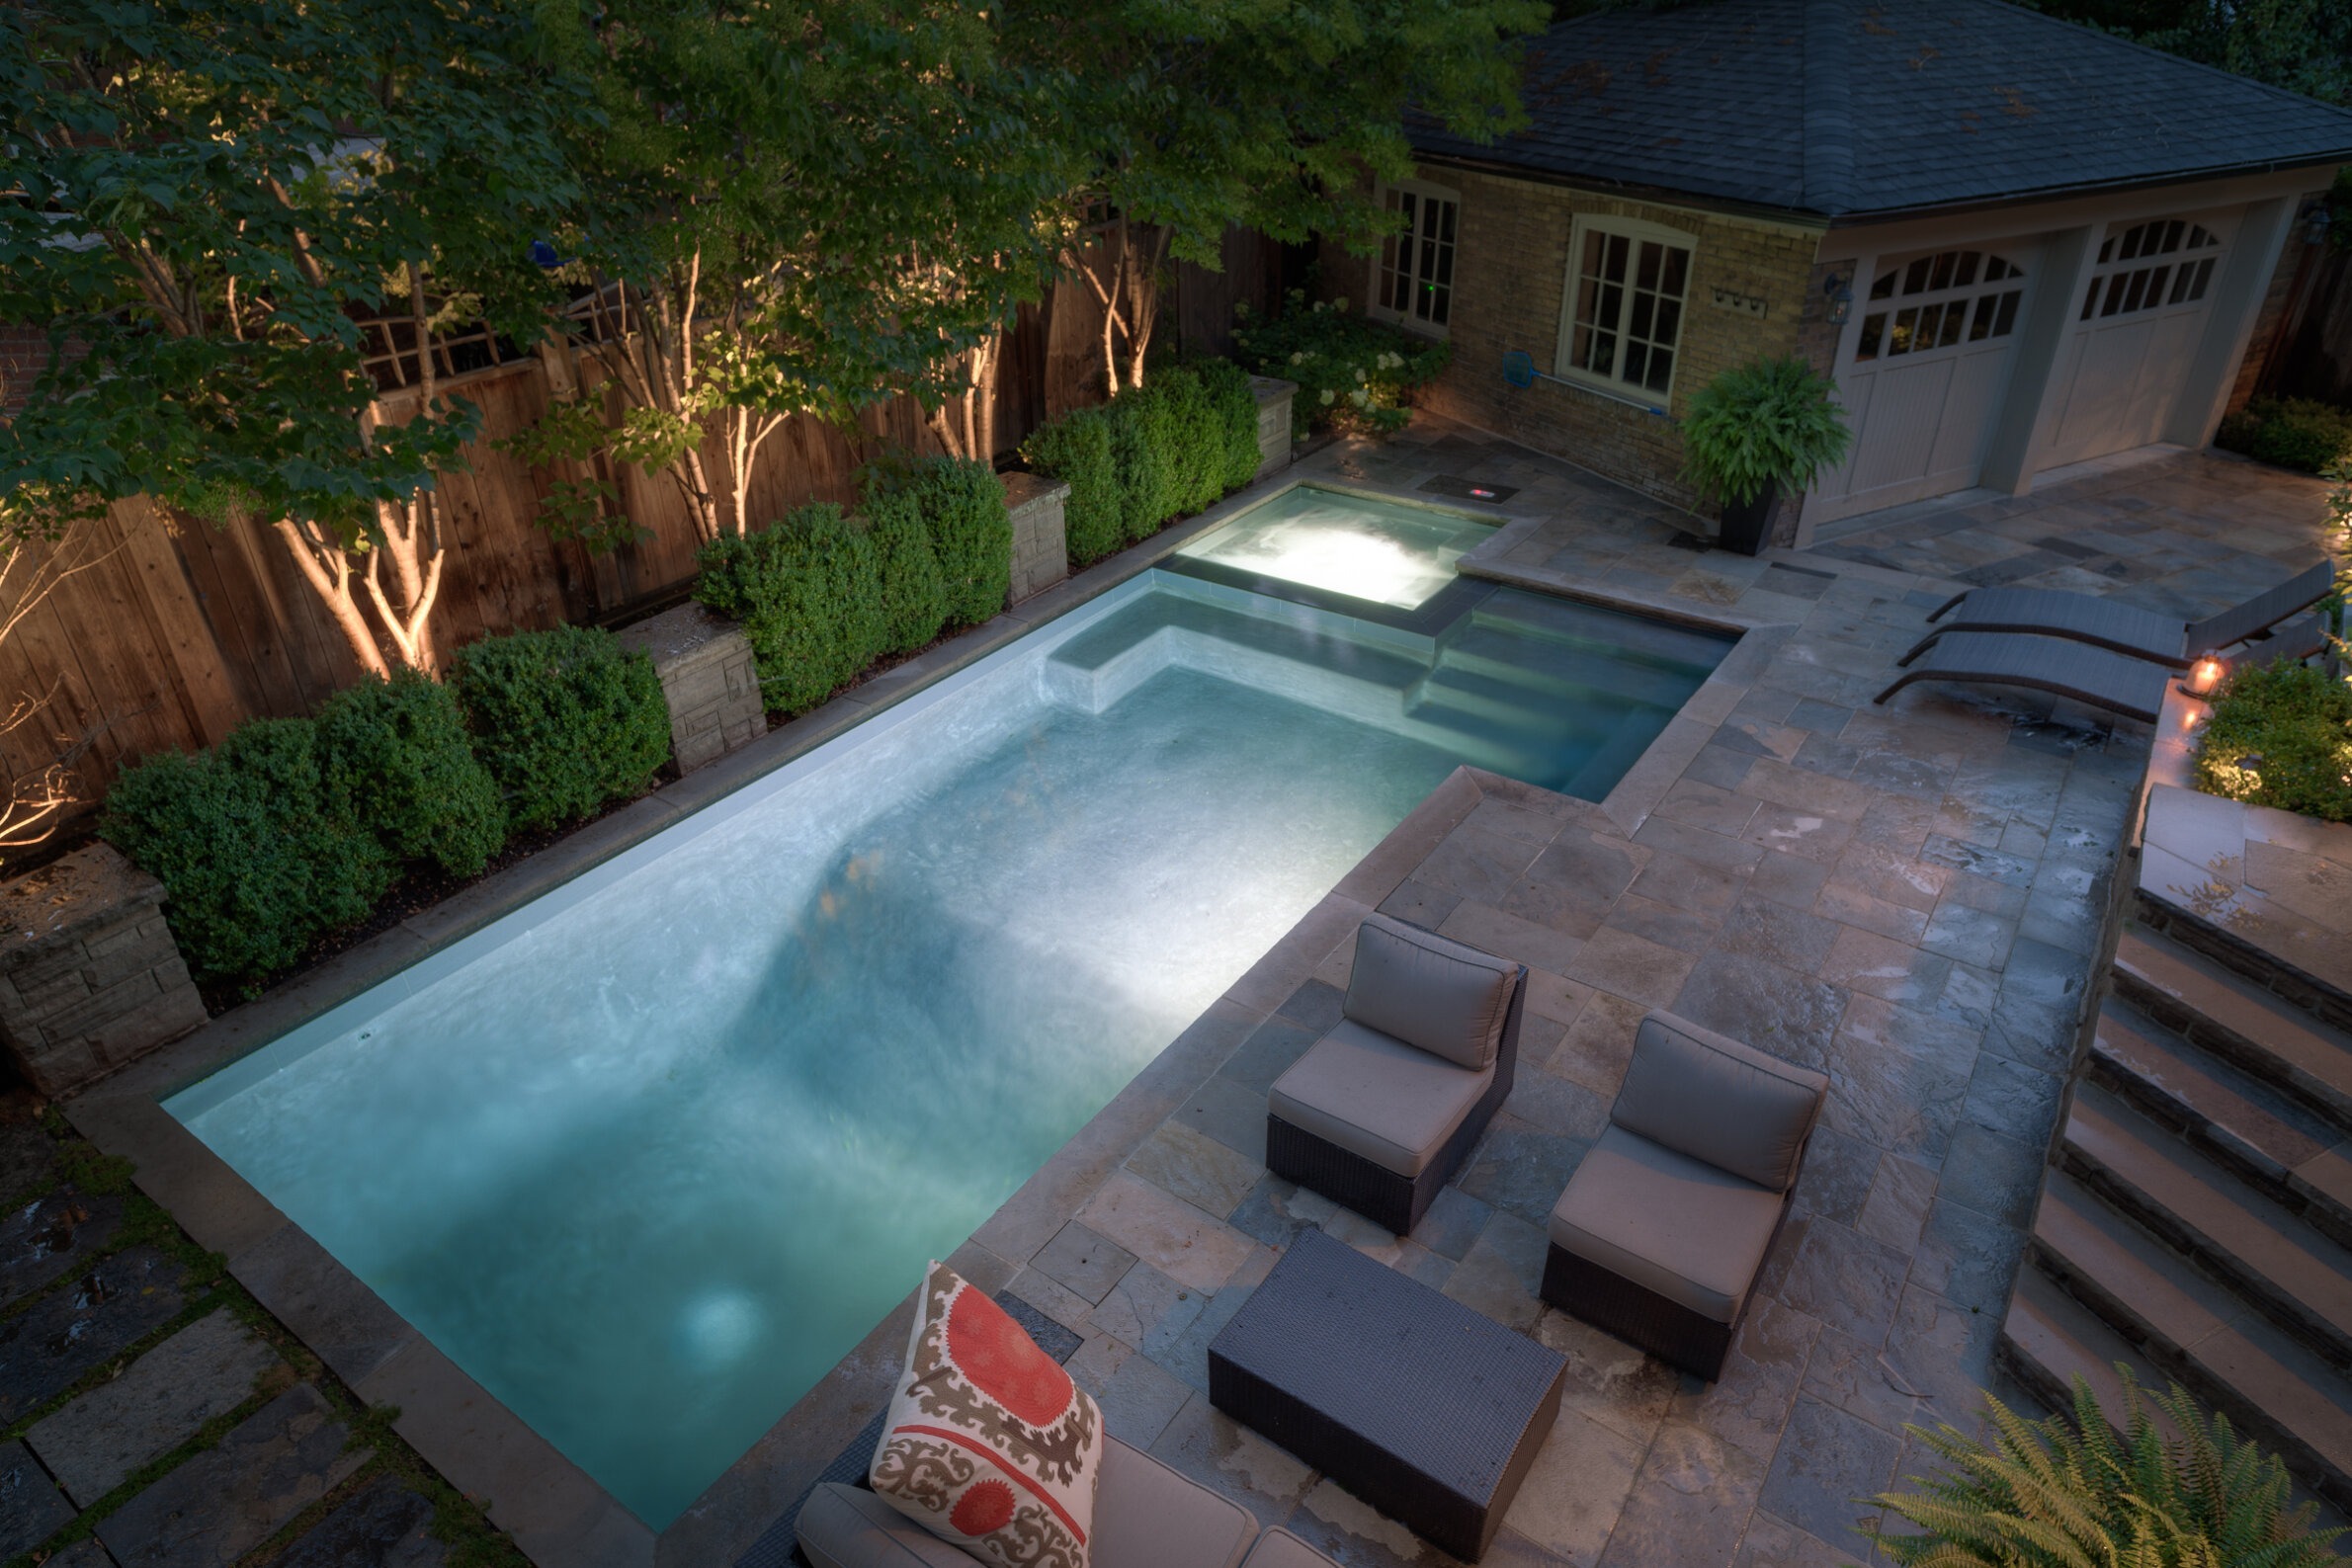 A serene backyard at dusk featuring a lit rectangular pool surrounded by lounging chairs, stone tiles, lush greenery, and a cozy pool house.